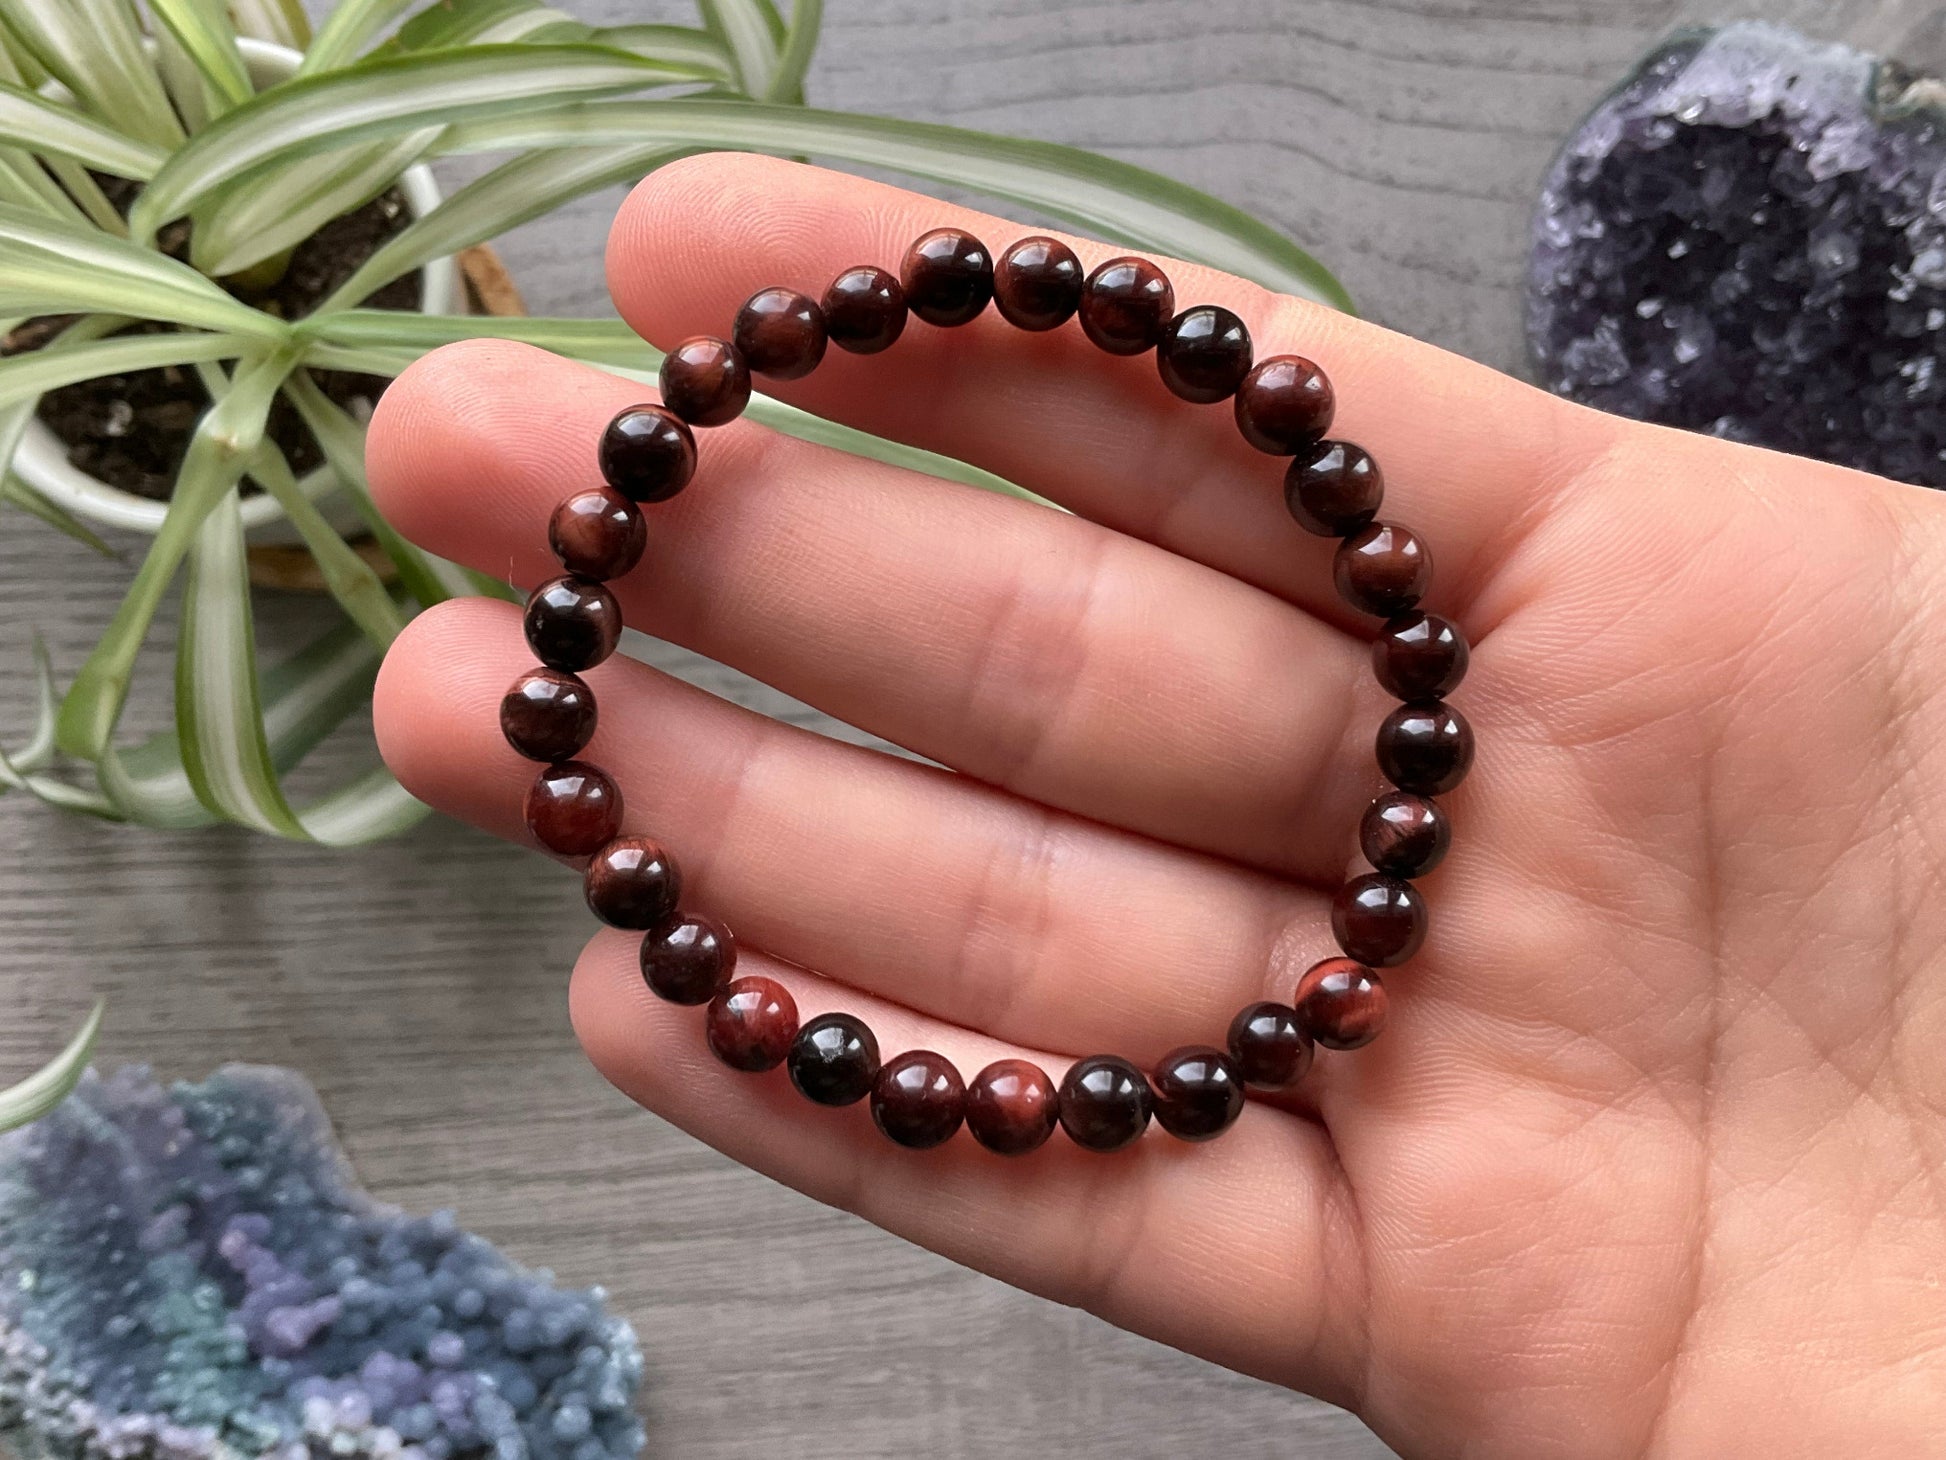 Pictured is a red tiger's eye bead bracelet.